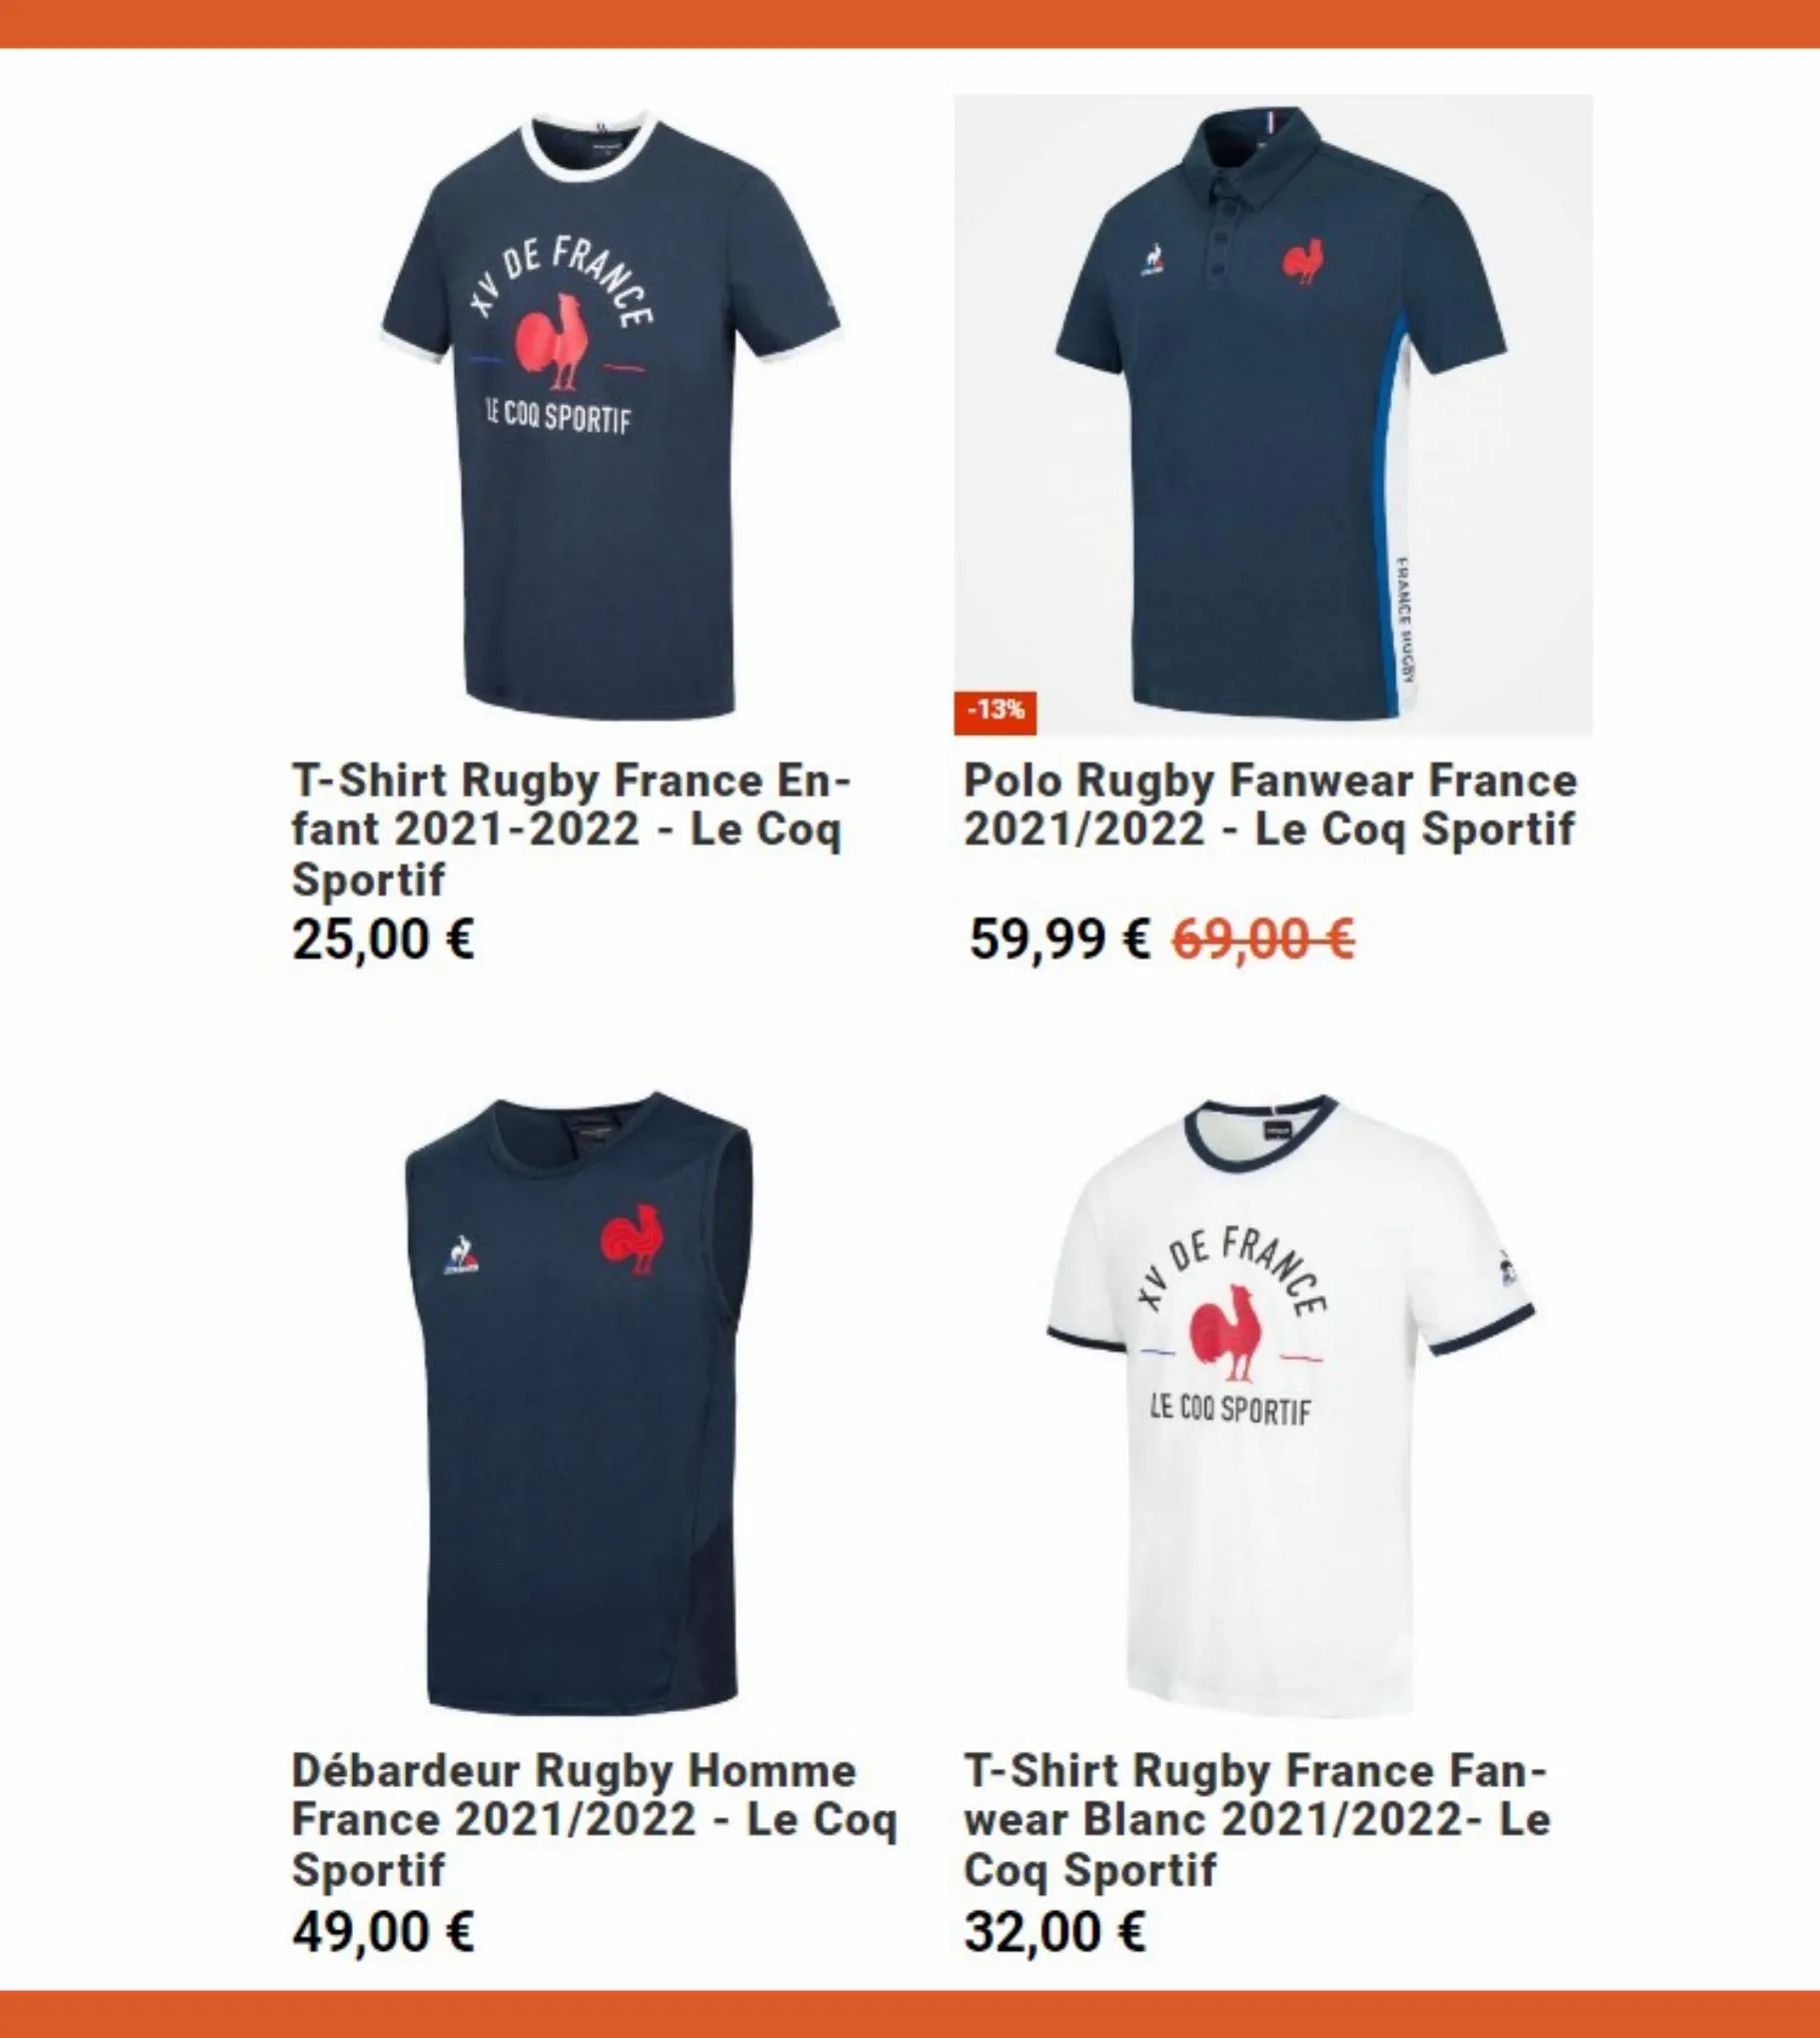 Catalogue Promotions France 2022, page 00006